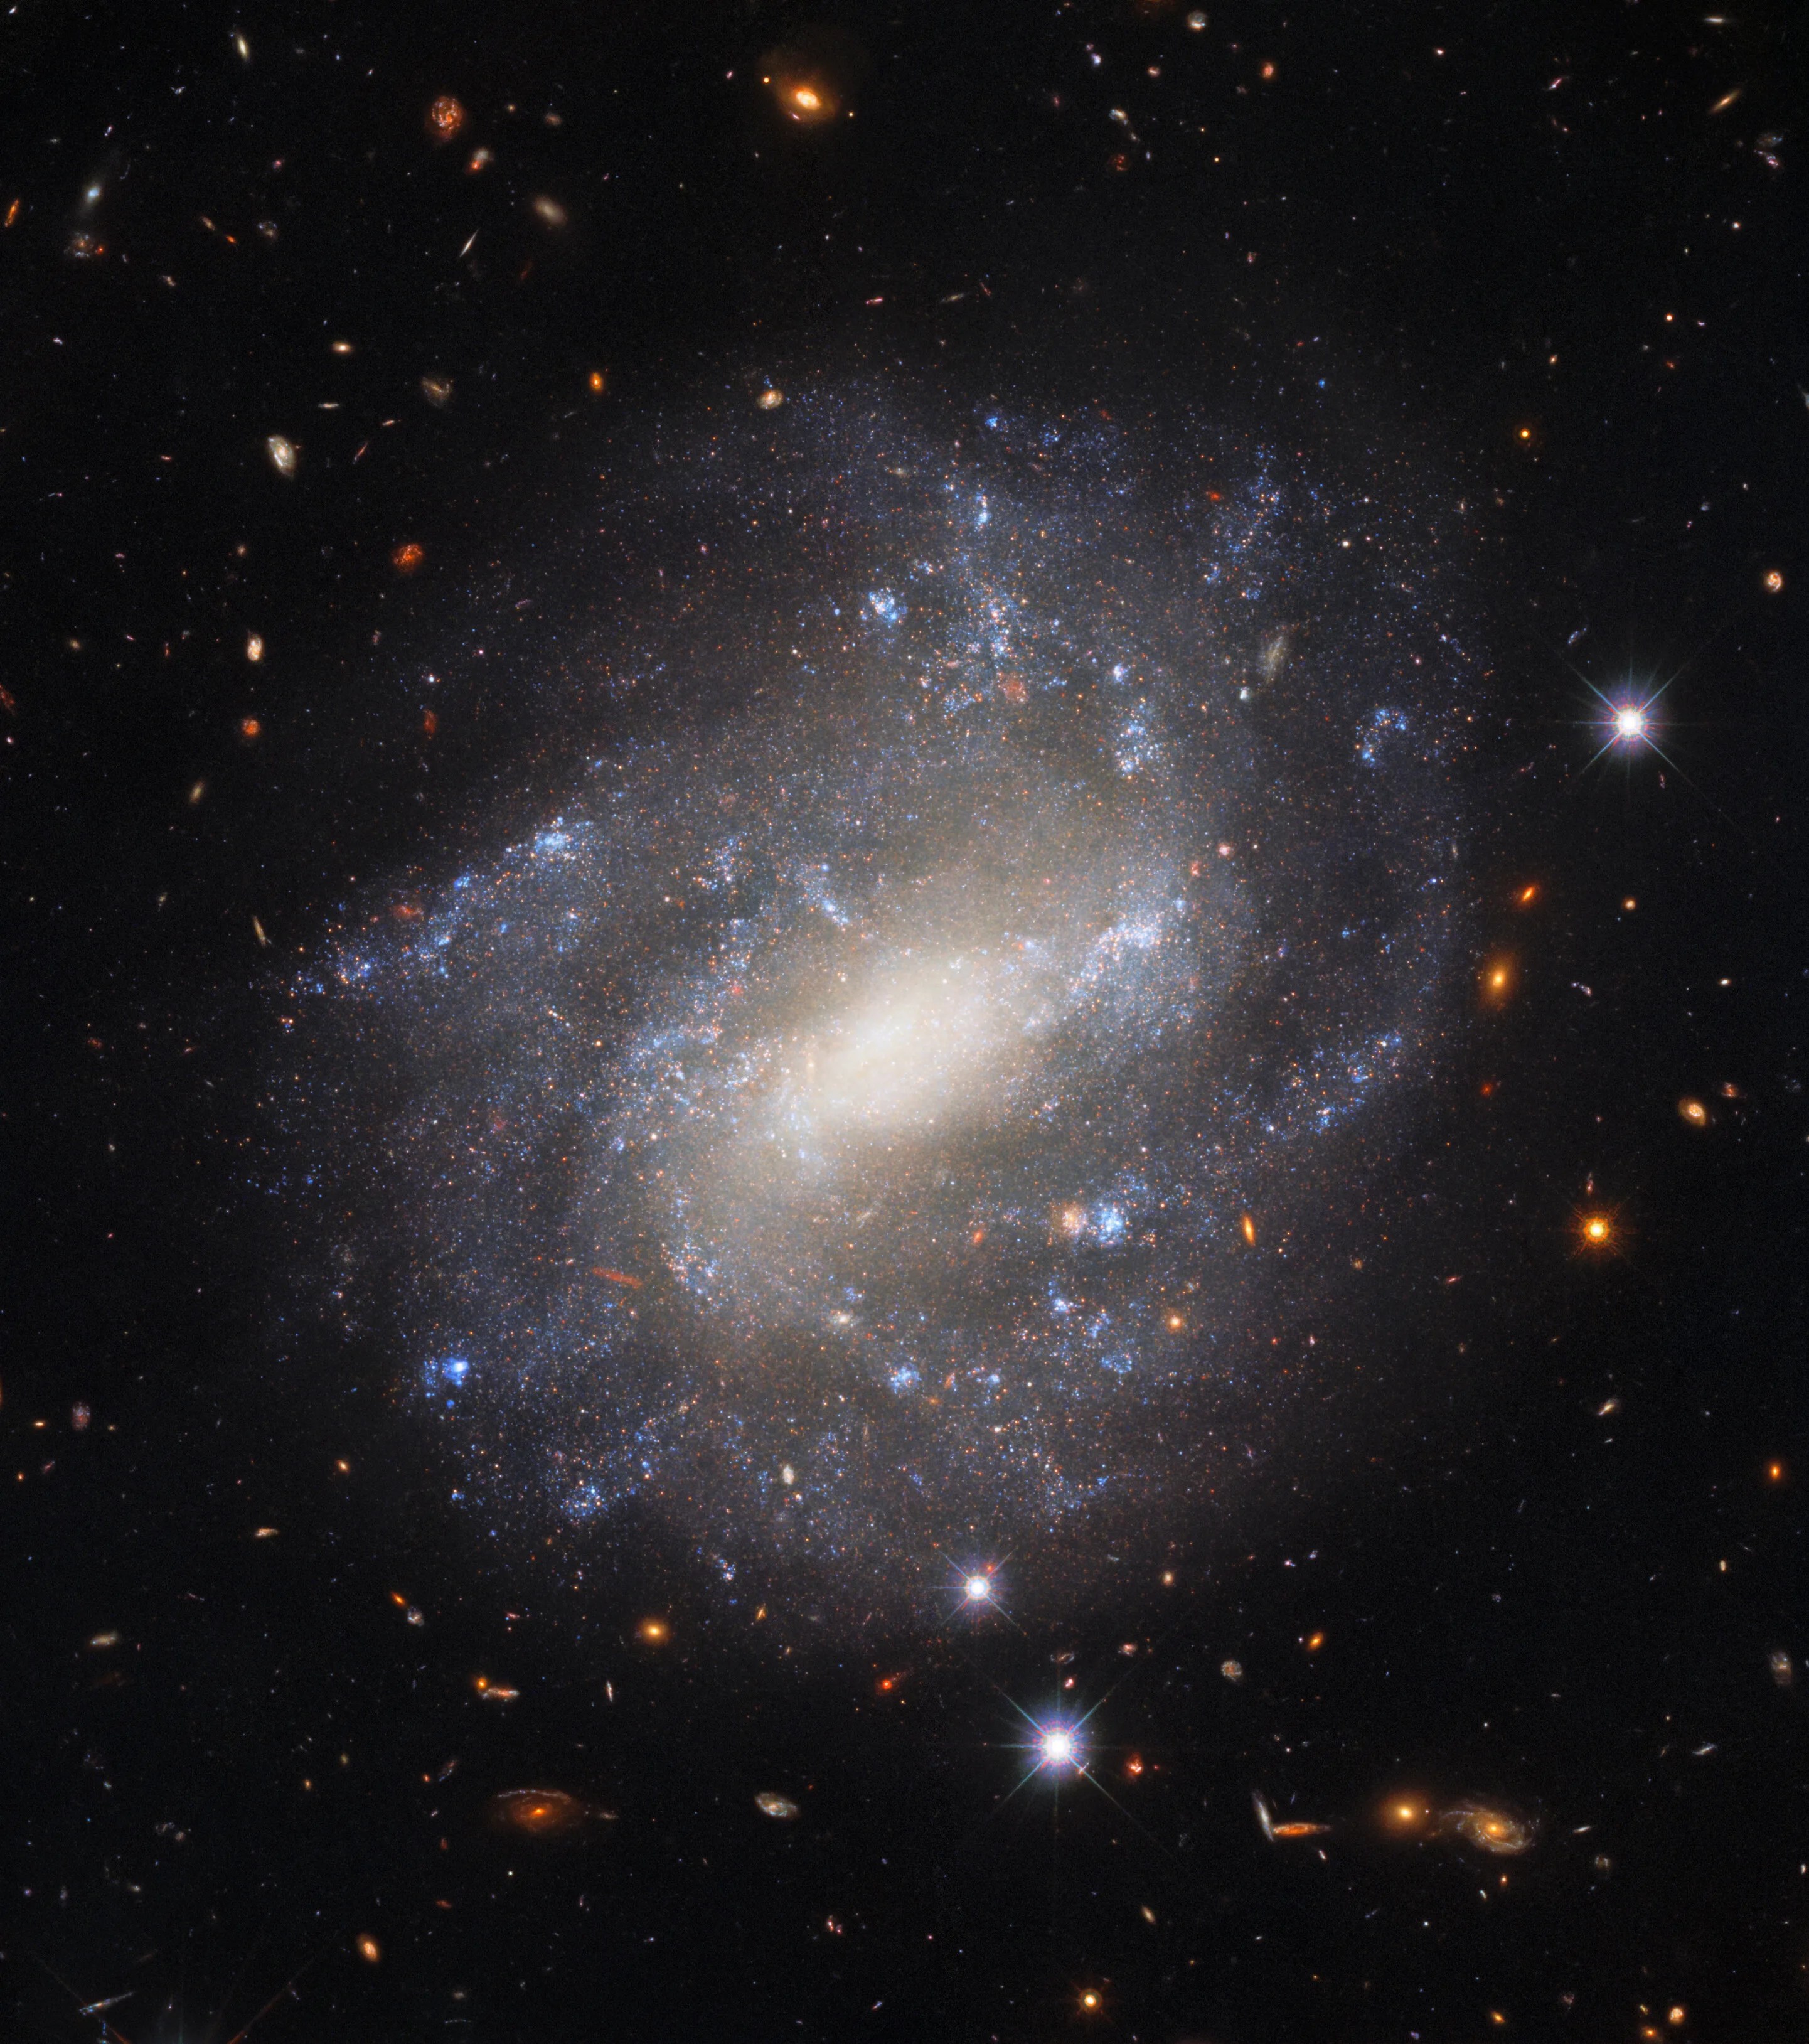 Bright spiral fills the scene. its spiral arms are diffuse but evident. bright blue-white star clusters dot its spiral arms.